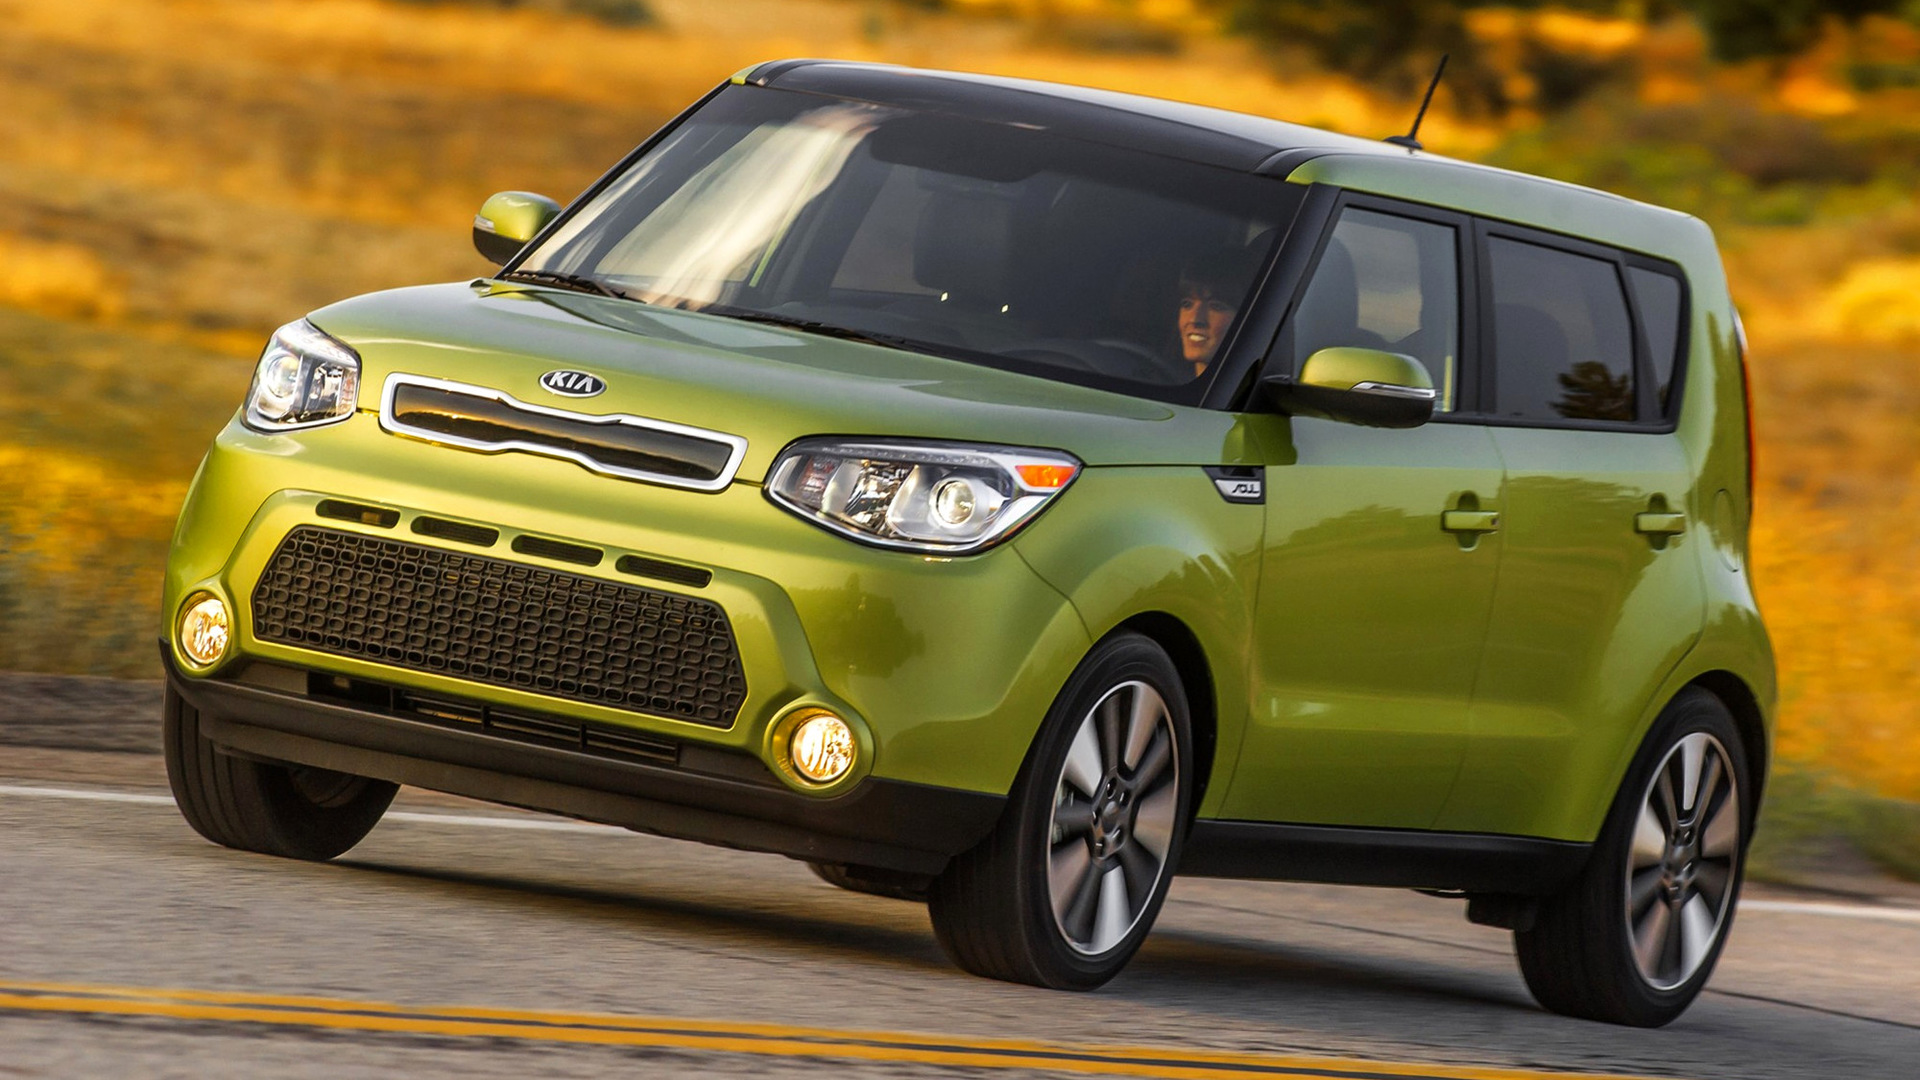 2013 Kia Soul (US) - Wallpapers and HD Images | Car Pixel